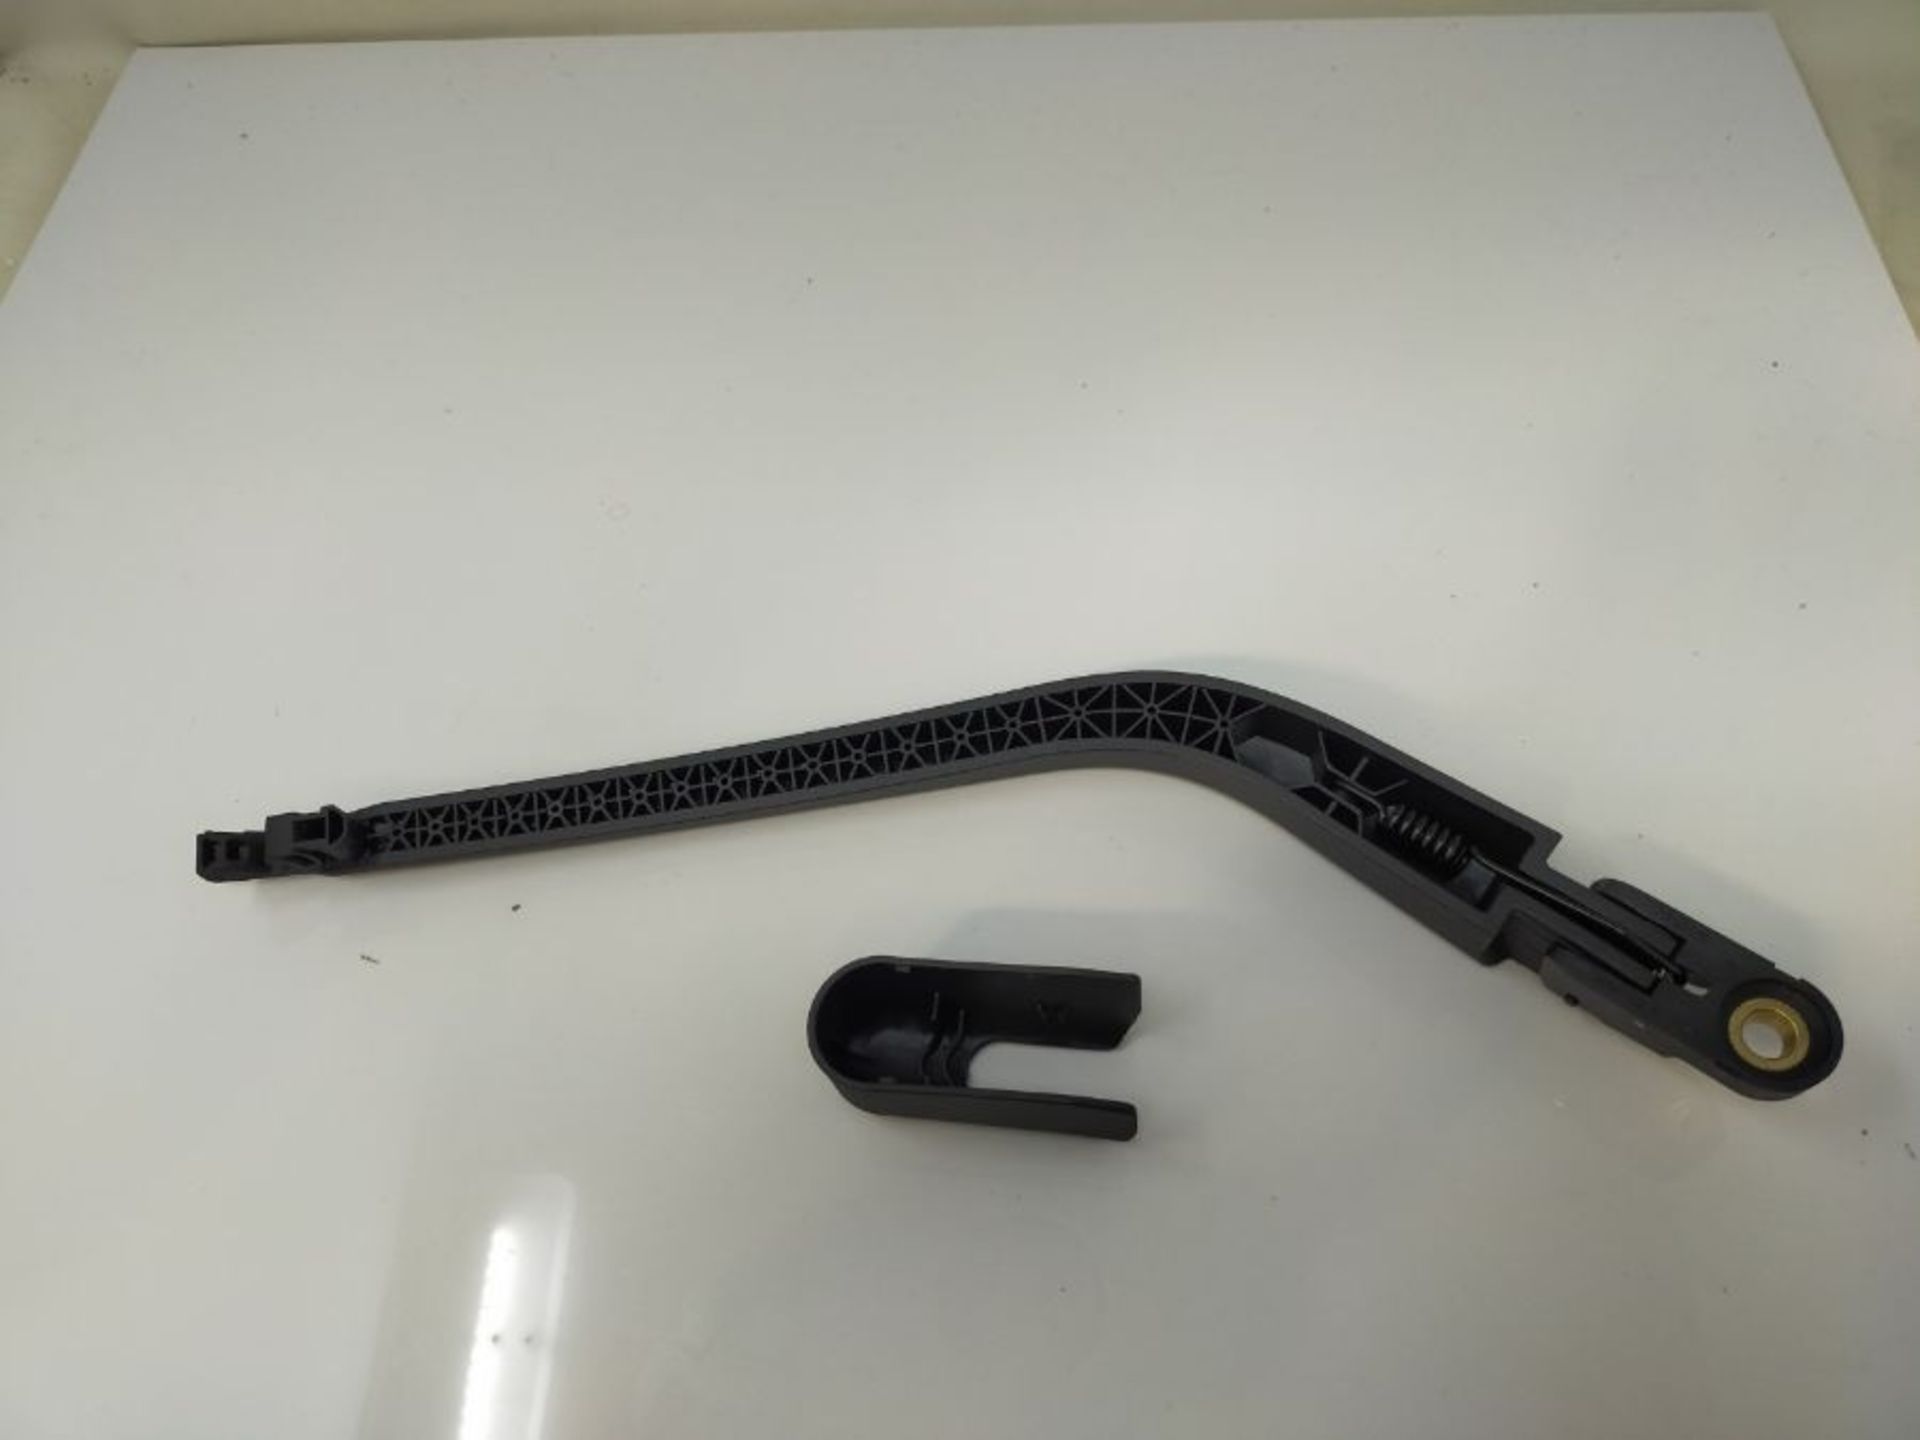 [INCOMPLETE] Rear Wiper Arm Blade, Replacement for Hyundai I10 2007-2013 - ZOFFI Back - Image 3 of 6